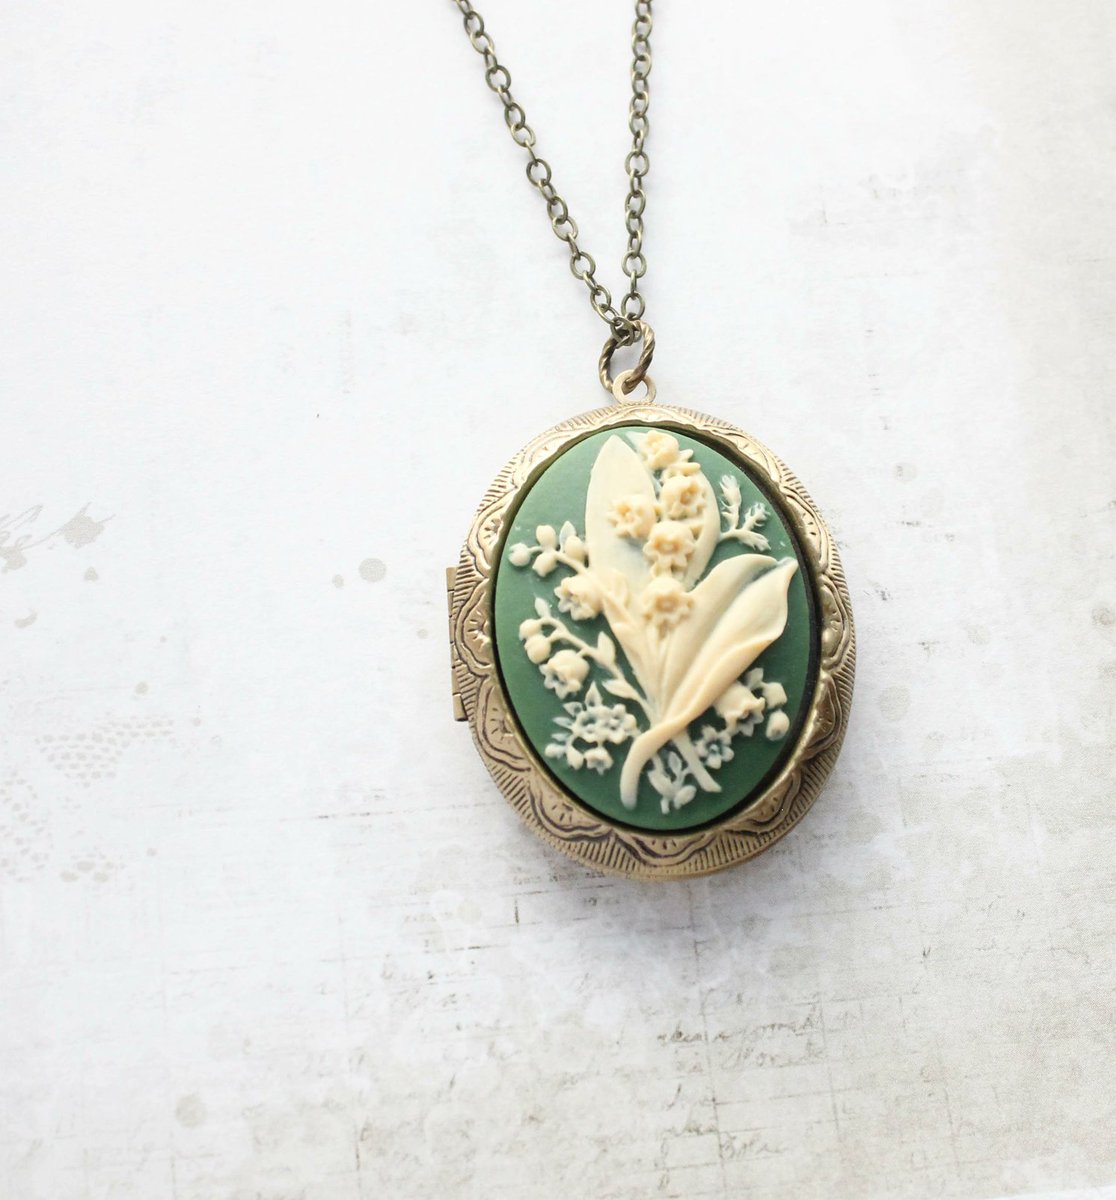 Lily of the Valley Locket

This is a large antiqued gold brass photo locket with a beautiful lily of the valley cameo in green and ivory cream.

The locket measures 1.5'w x 1.75 'h (36mm x 45mm) and has two oval frames inside.
#carrboro #chapelhill #mymusescardshop